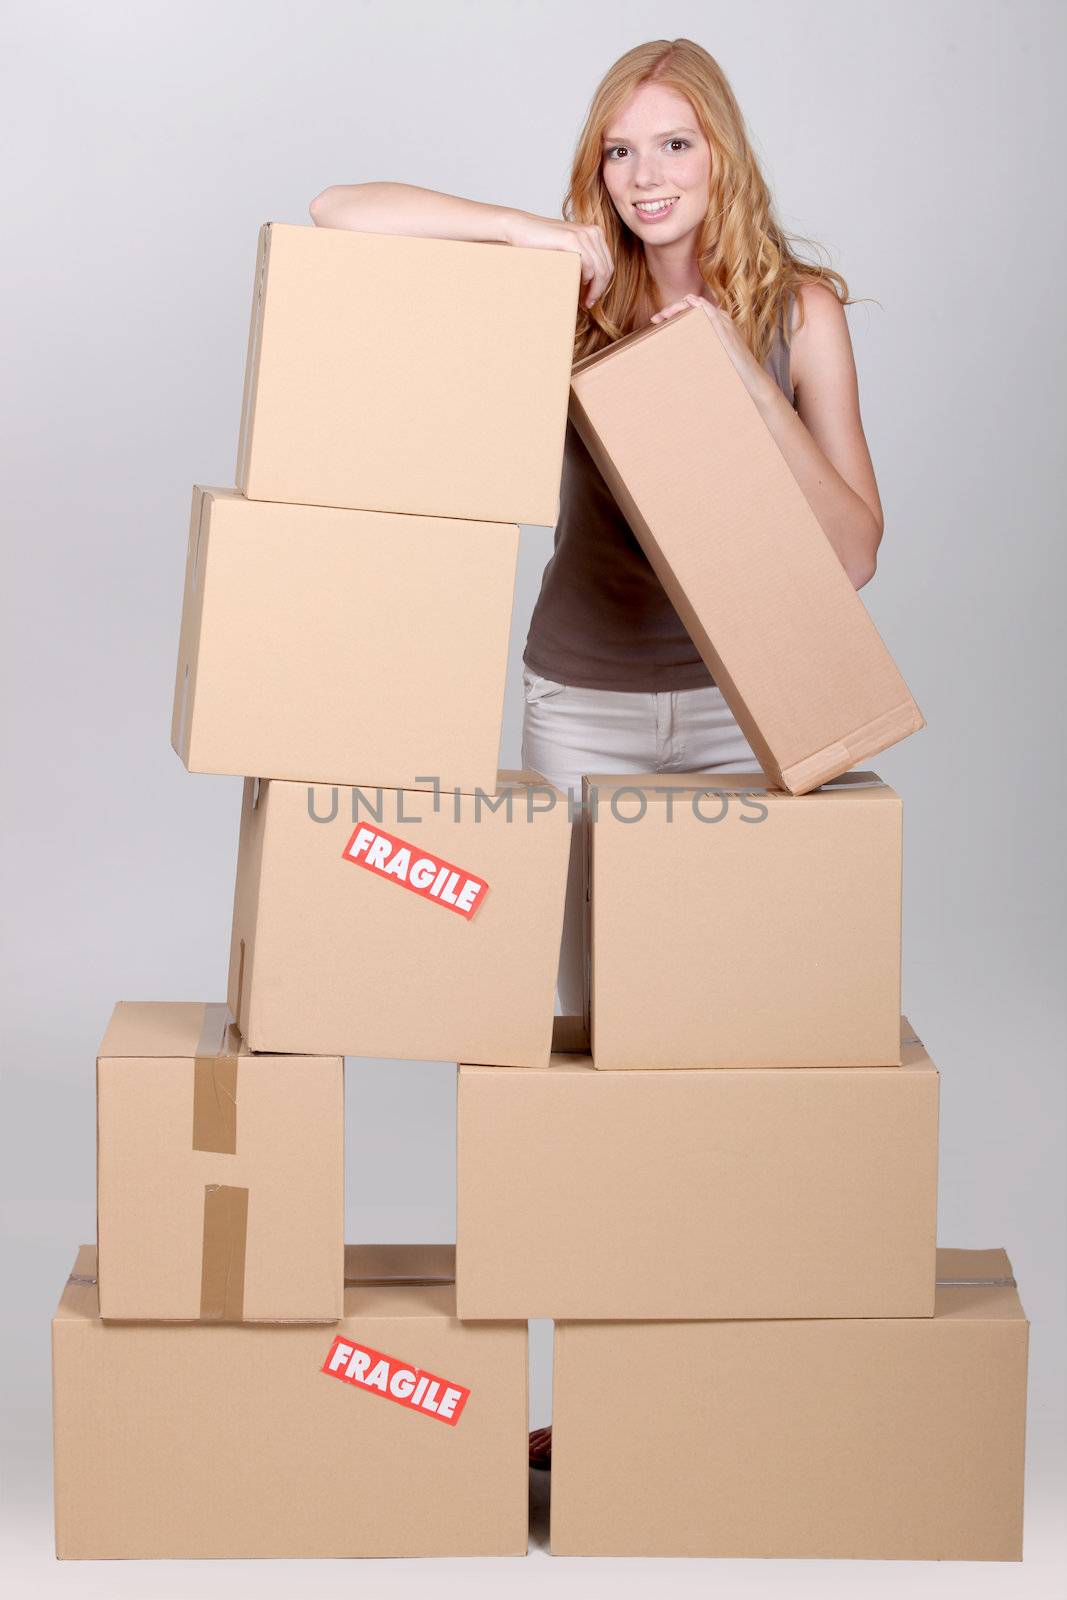 Young woman surrounded by cardboard boxes by phovoir